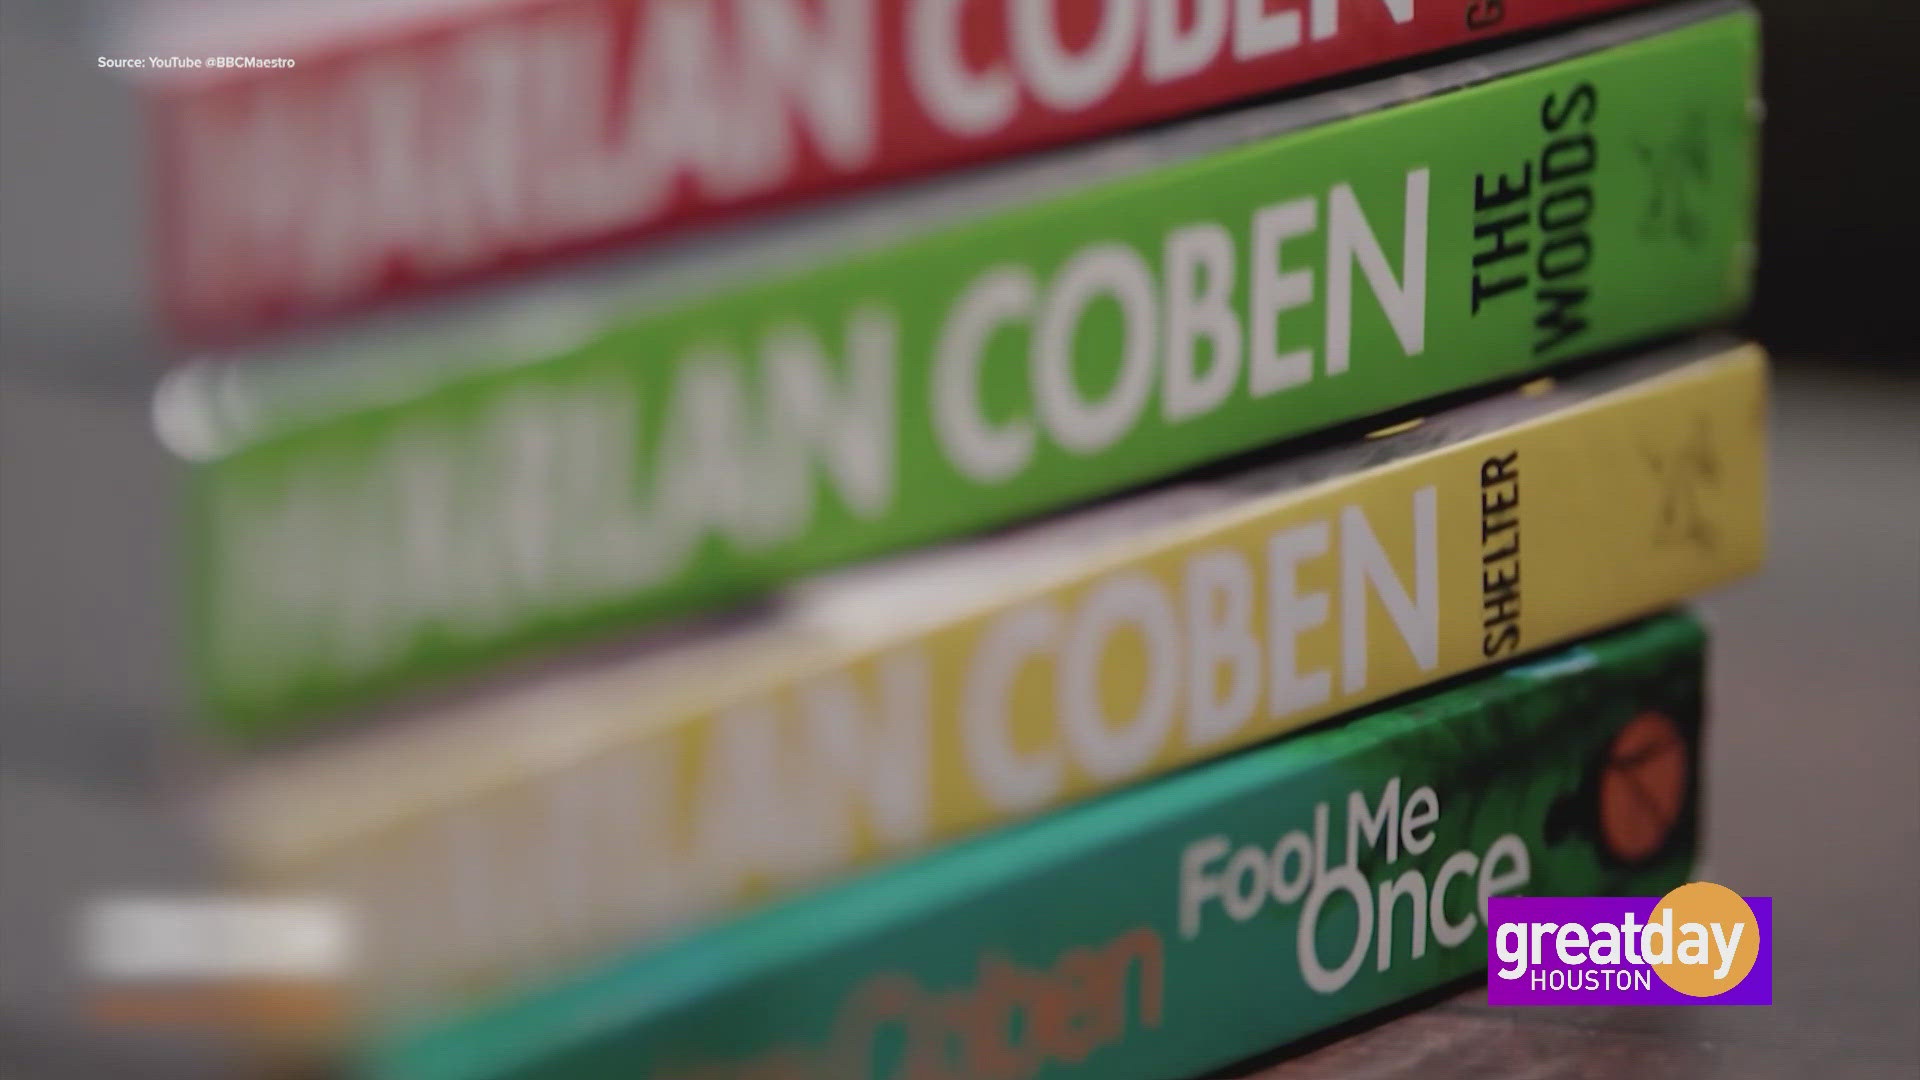 #1 New York Times bestselling author, Harlen Coben, details his life's journey to becoming one of today's most popular writers